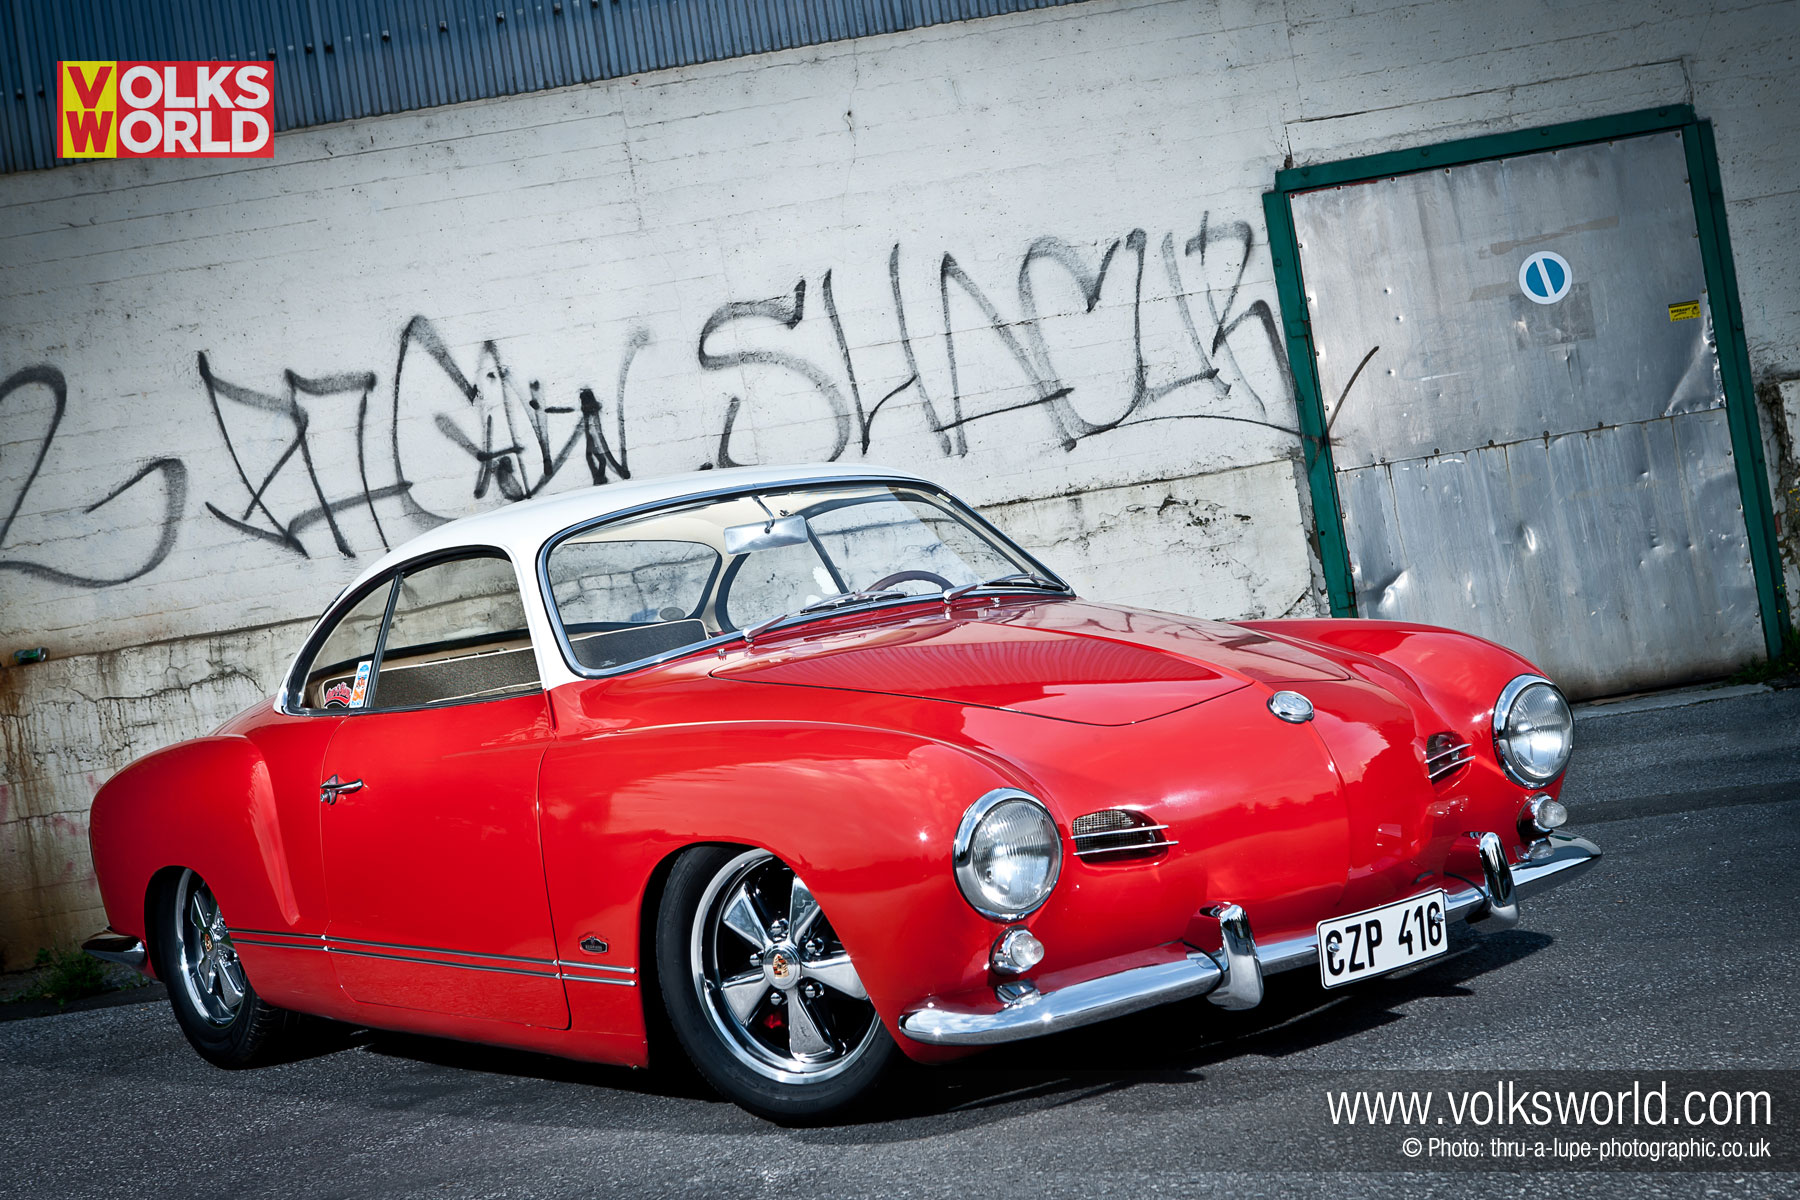 Like Volksworld Subscribe To The Magazine For More Great Features